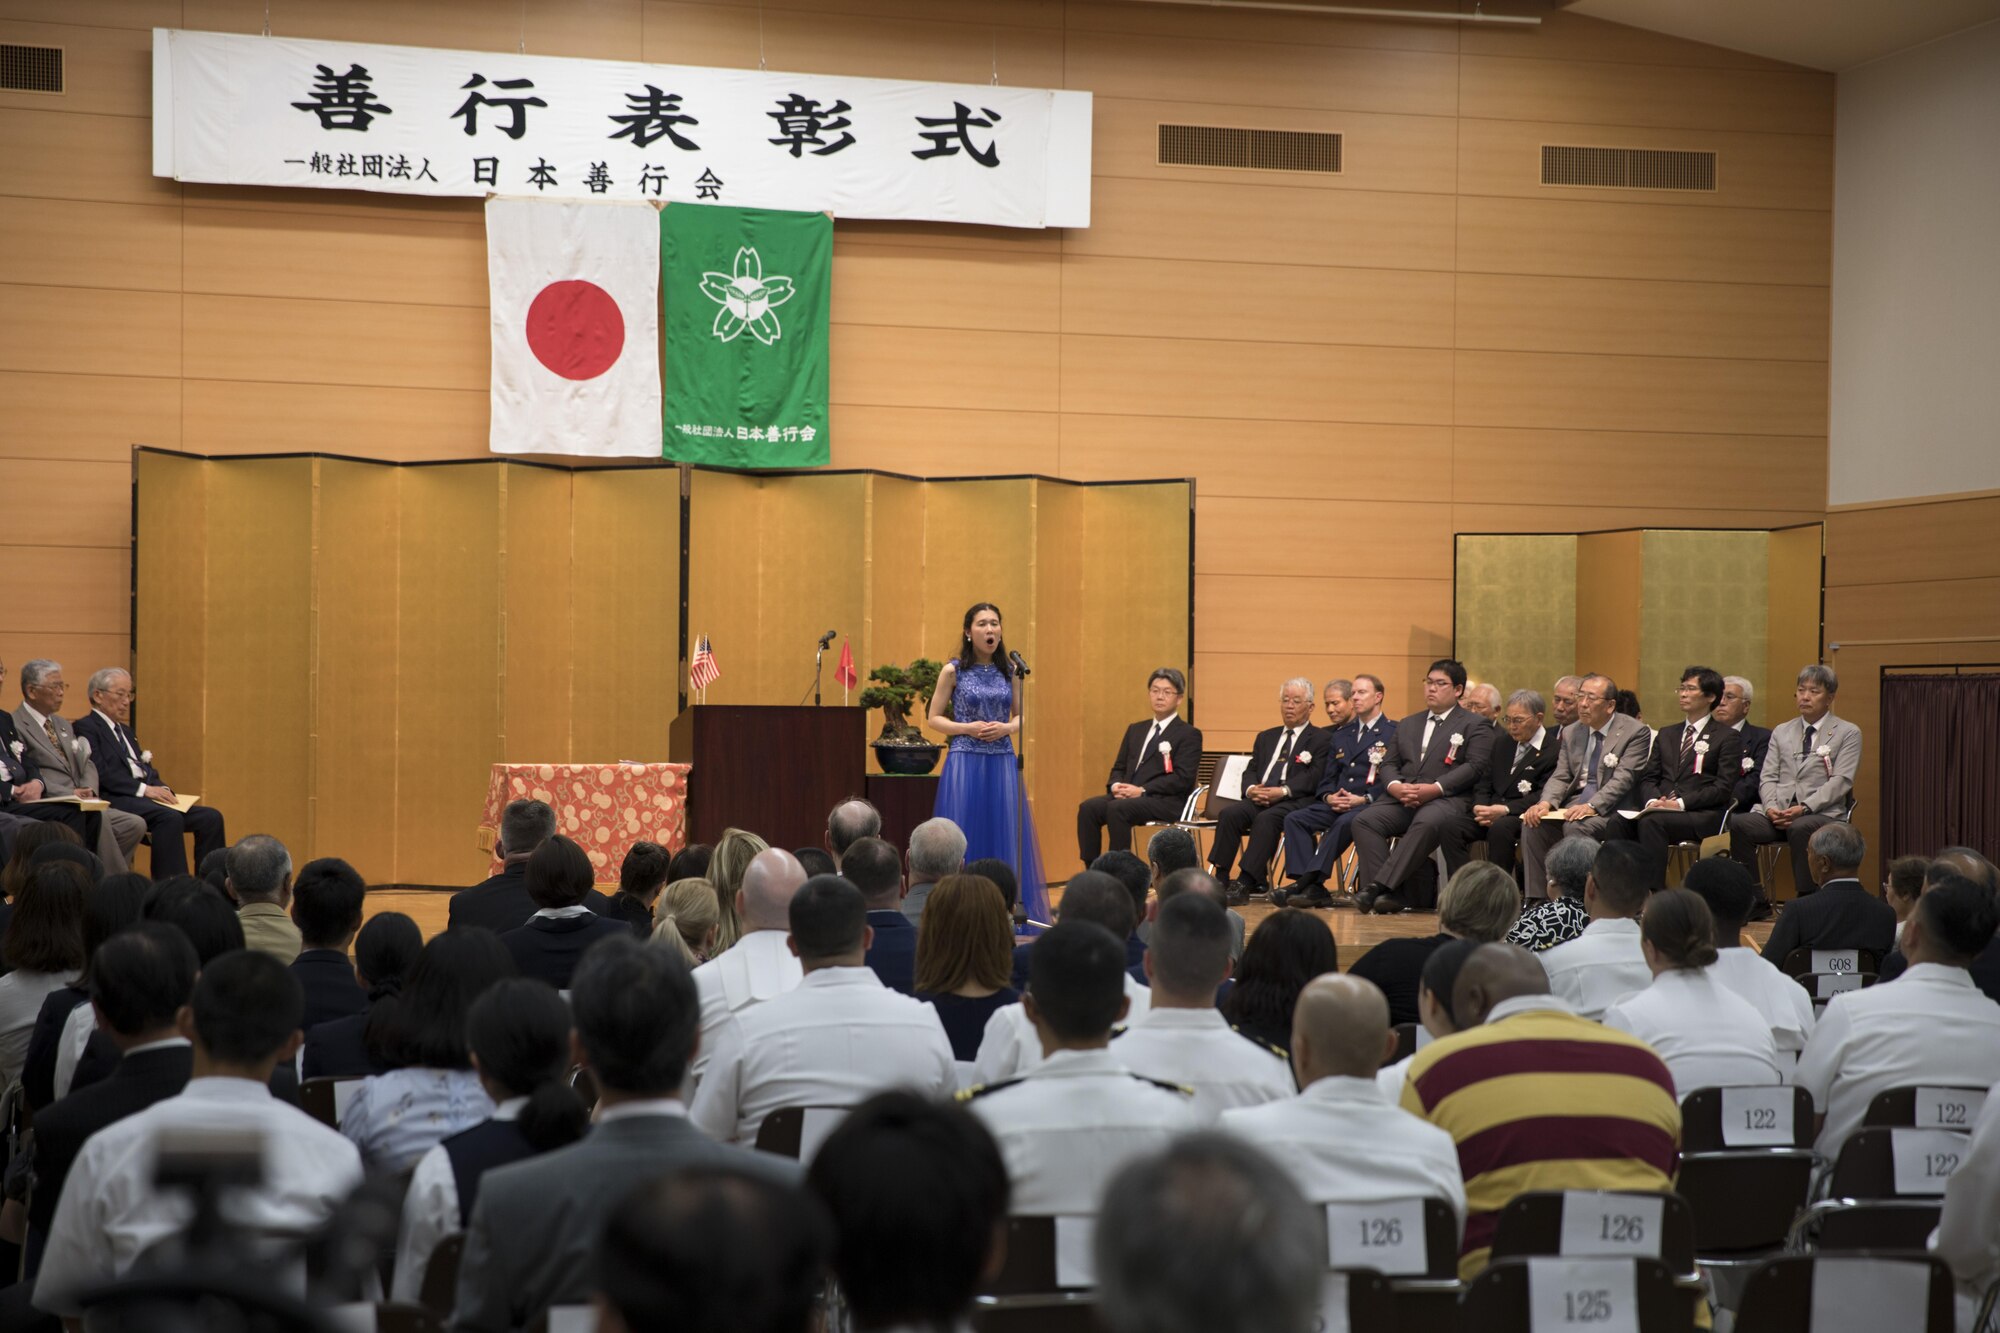 Takami Hirosawa, vocalist, performs at the Good Deed Award Ceremony, May 20, 2017, at the Meiji Shrine, Tokyo, Japan. The Good Deed Association is a non-profit organization under the management of the Cabinet Office of the Government of Japan and is committed to encouraging good conduct and enhancing mutual relationships among the members of the community. (U.S. Air Force photo by Airman 1st Class Donald Hudson)